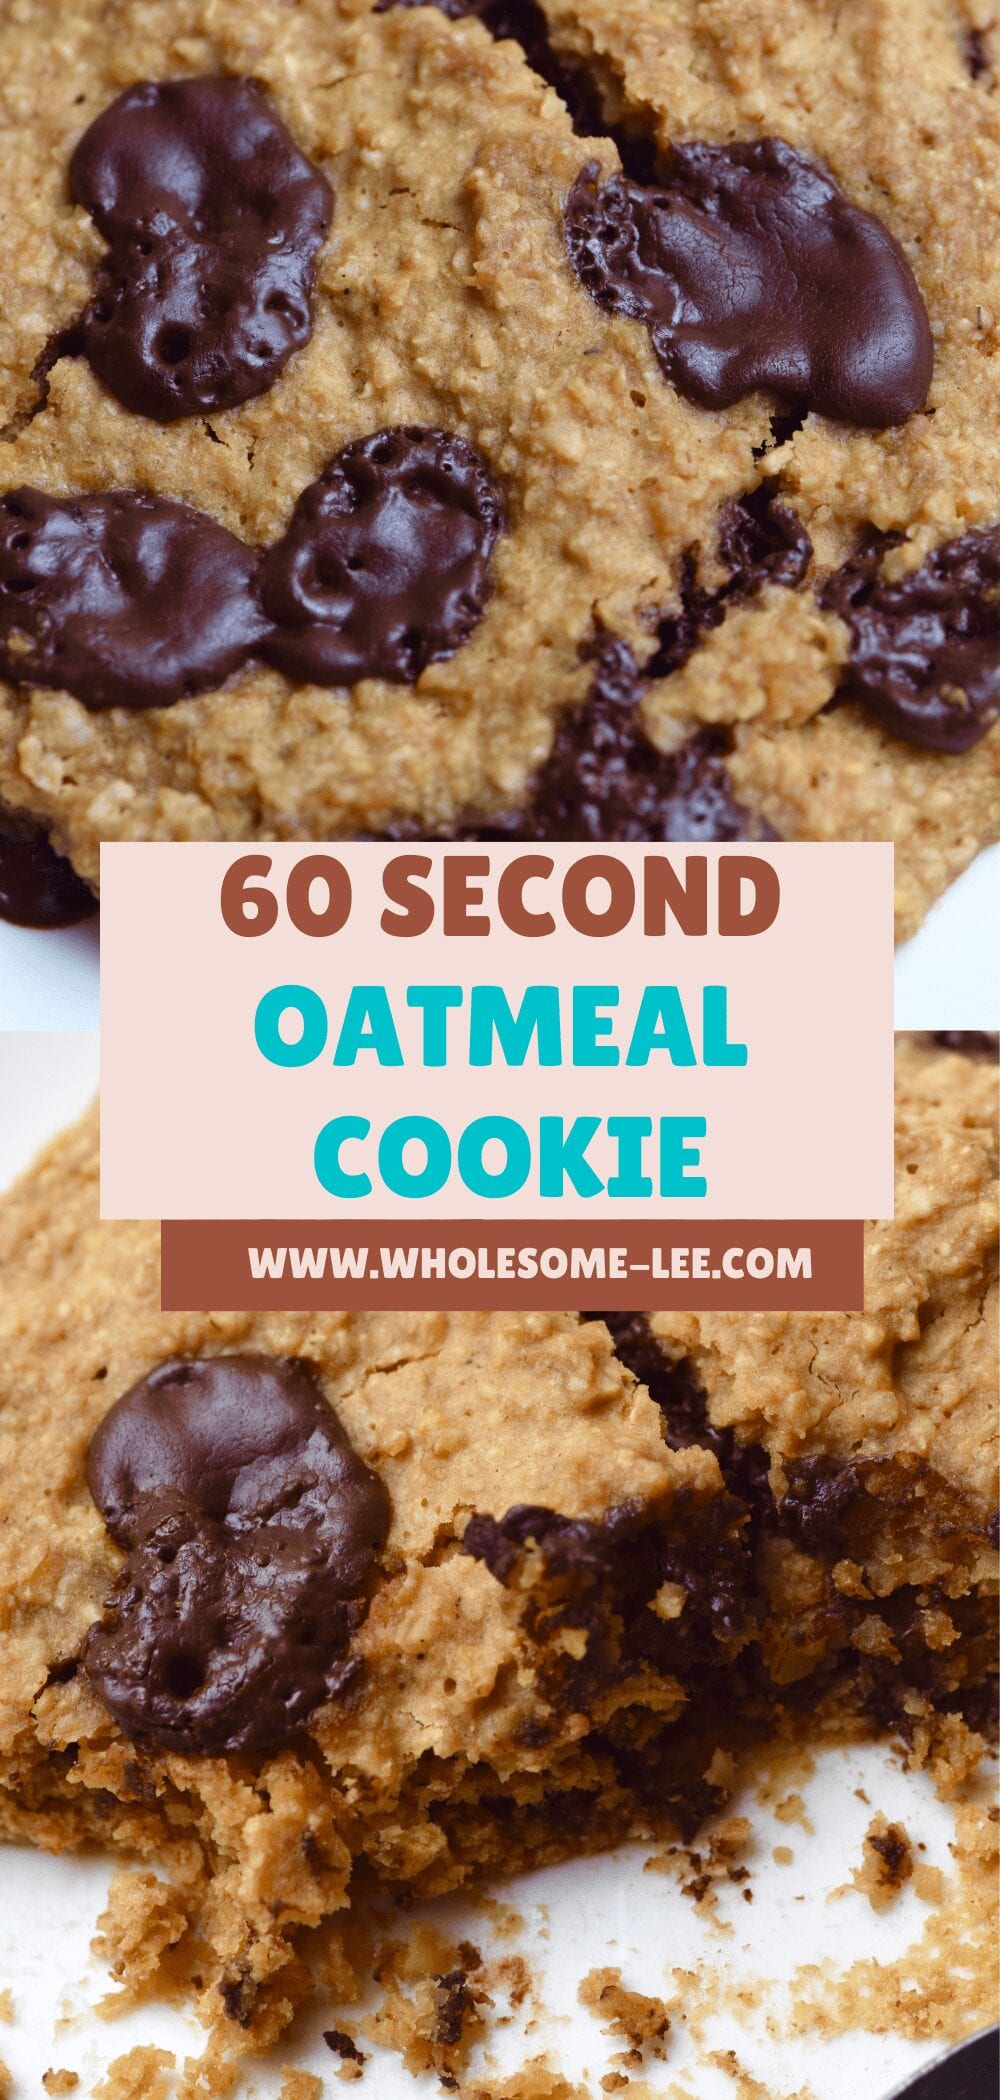 60 second oatmeal cookie